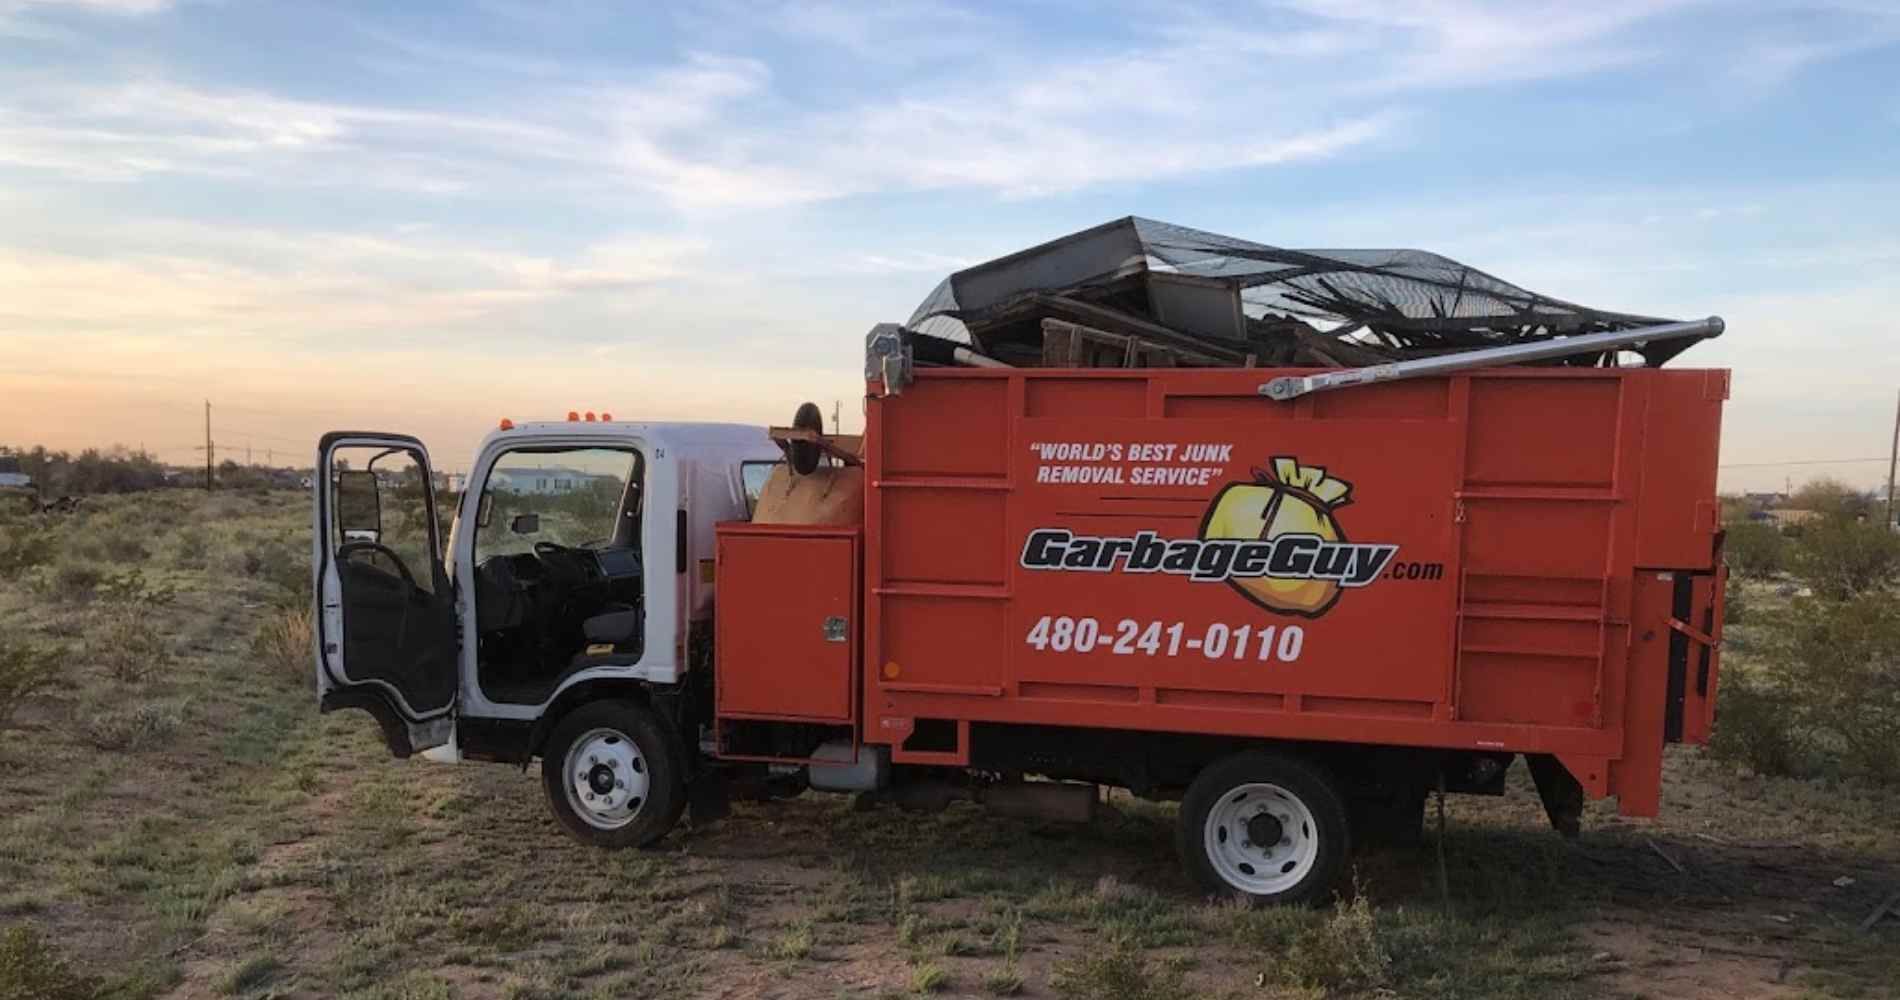 #1 for Junk Removal in Scottsdale, AZ with Over 1200 5-Star Reviews!